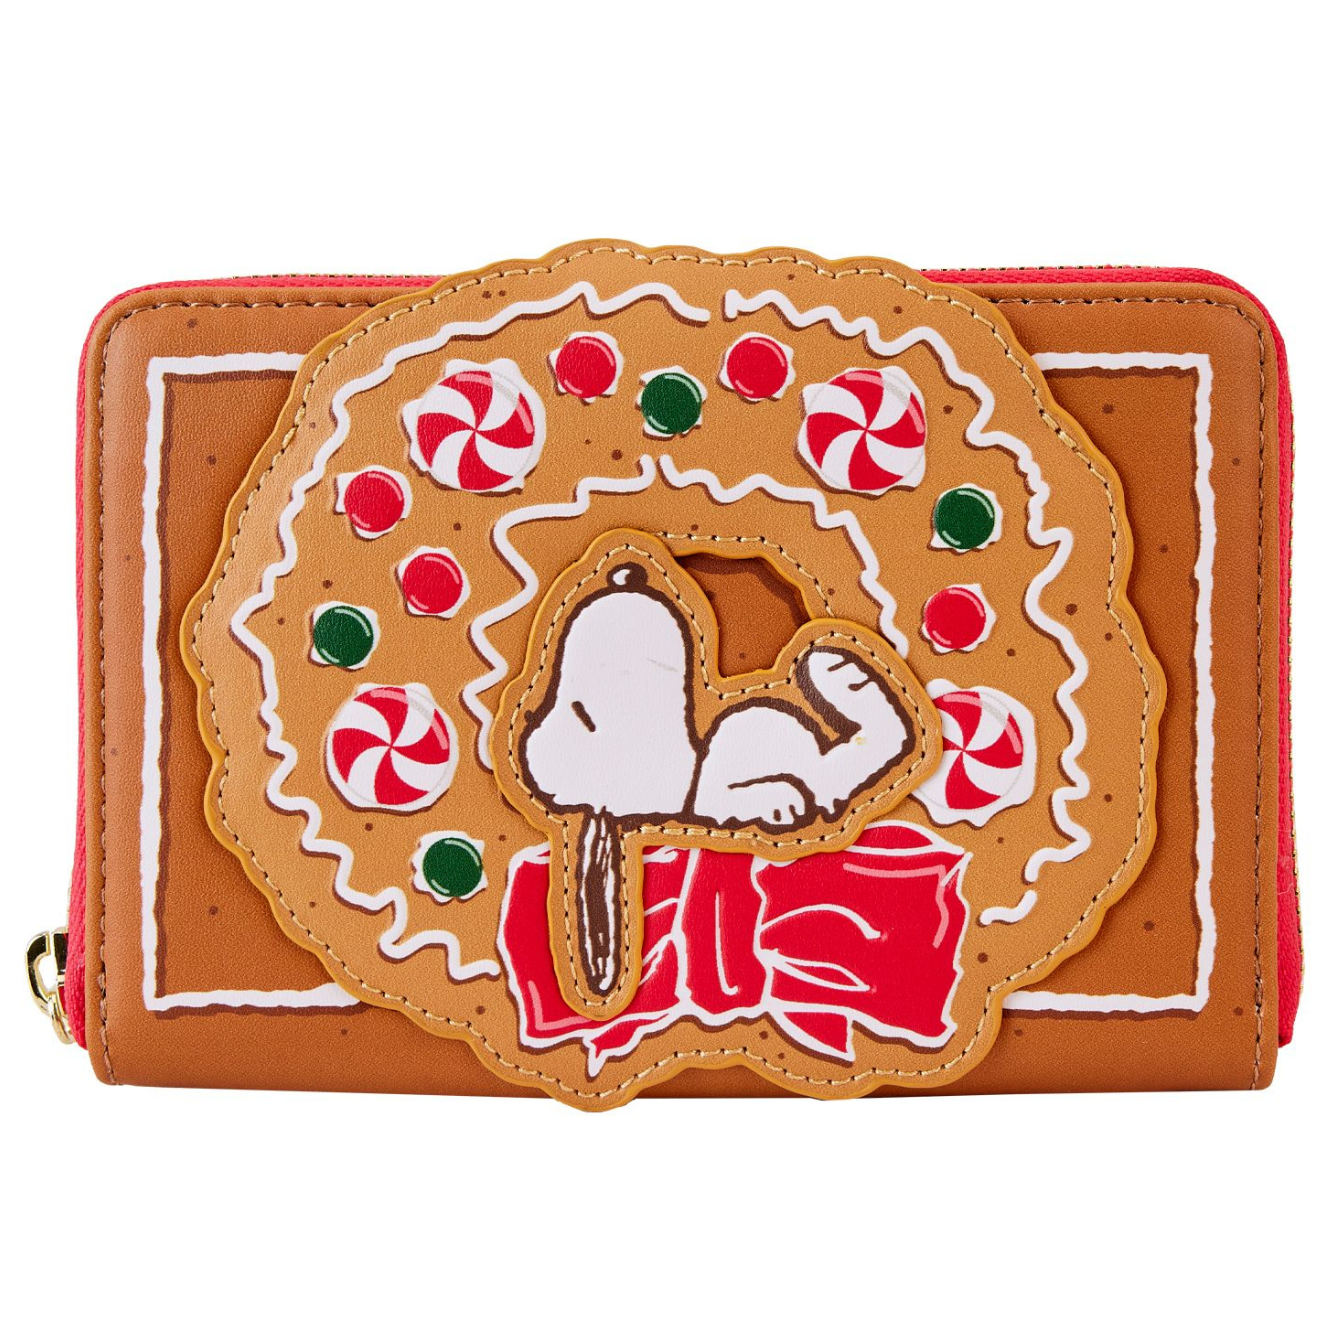 Loungefly Peanuts Snoopy Gingerbread House Wreath Wallet